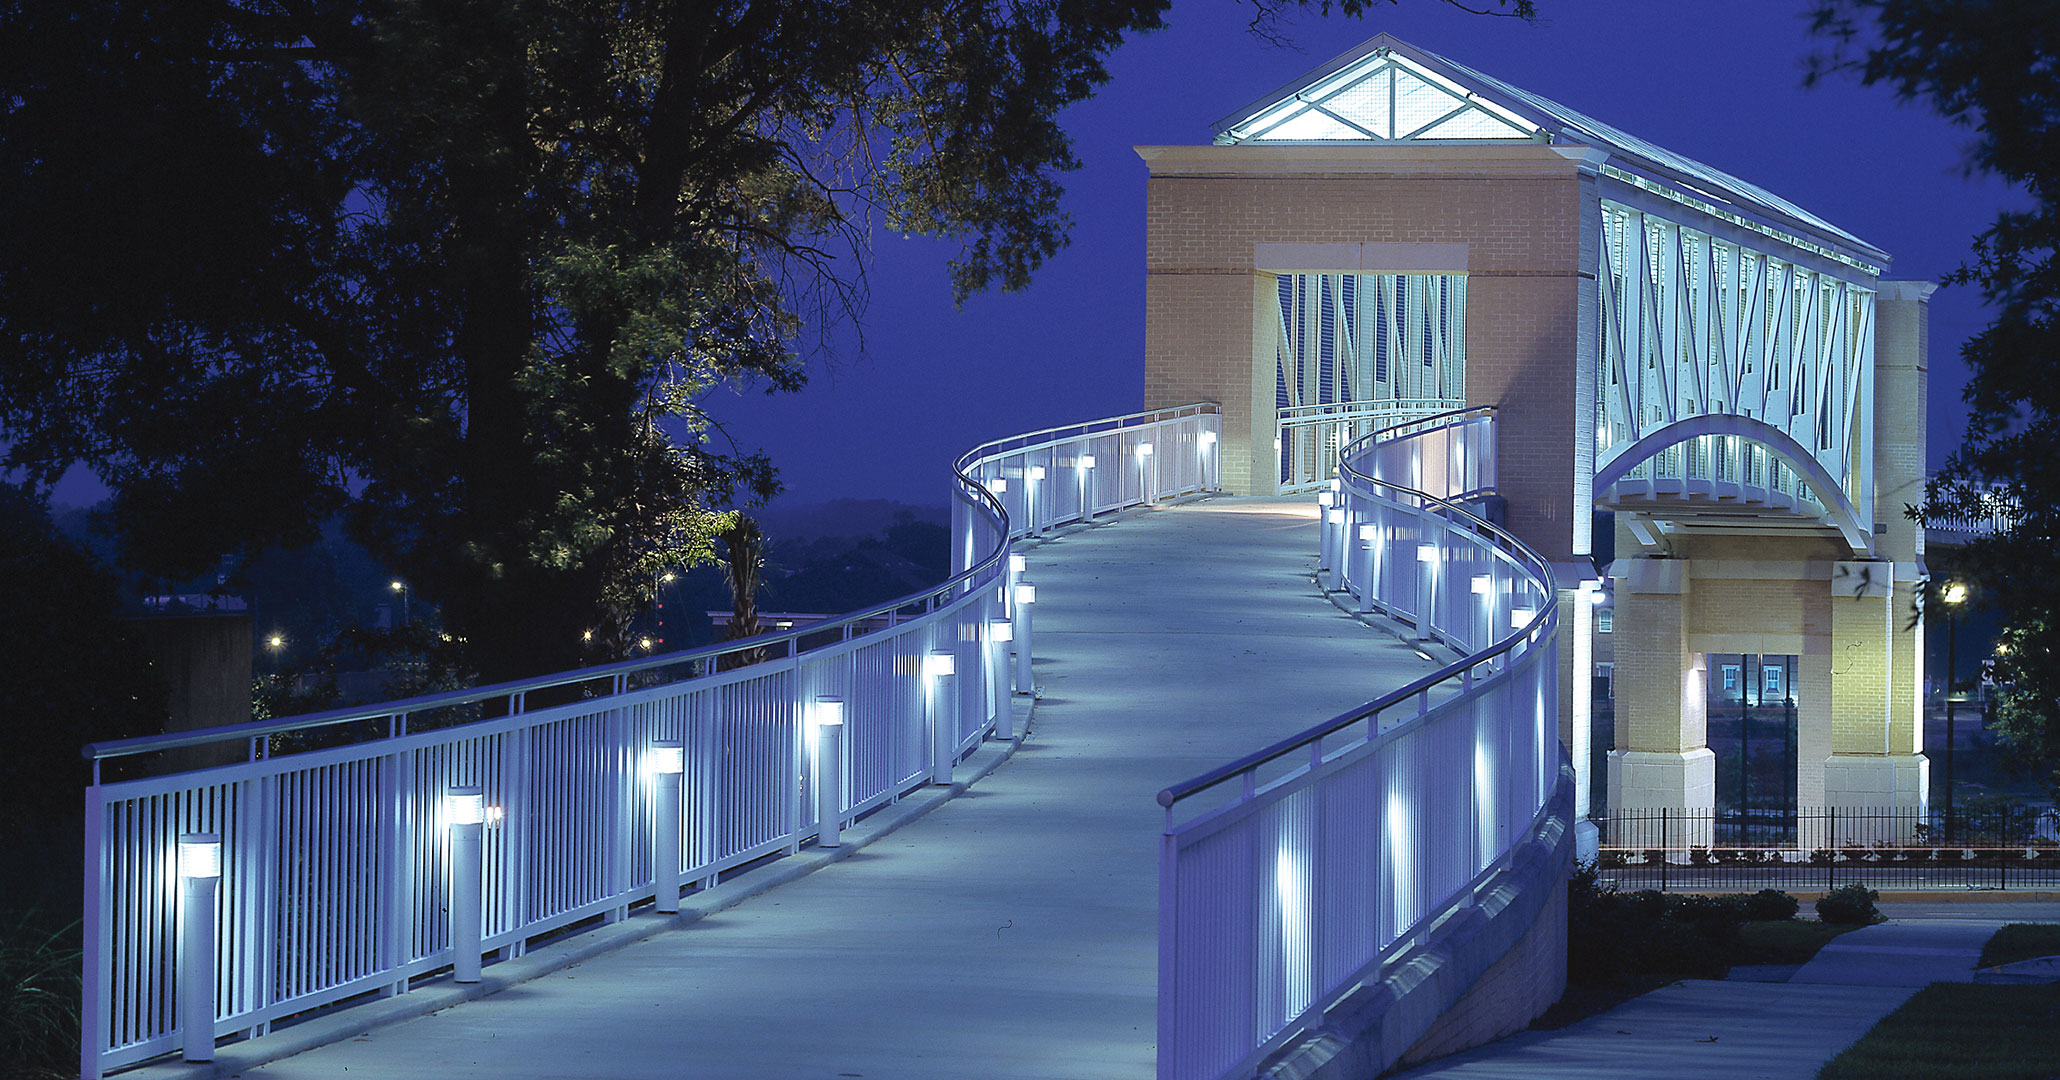 University of South Carolina worked with Boudreaux architects to build the pedestrian student bridge in downtown Columbia, SC.